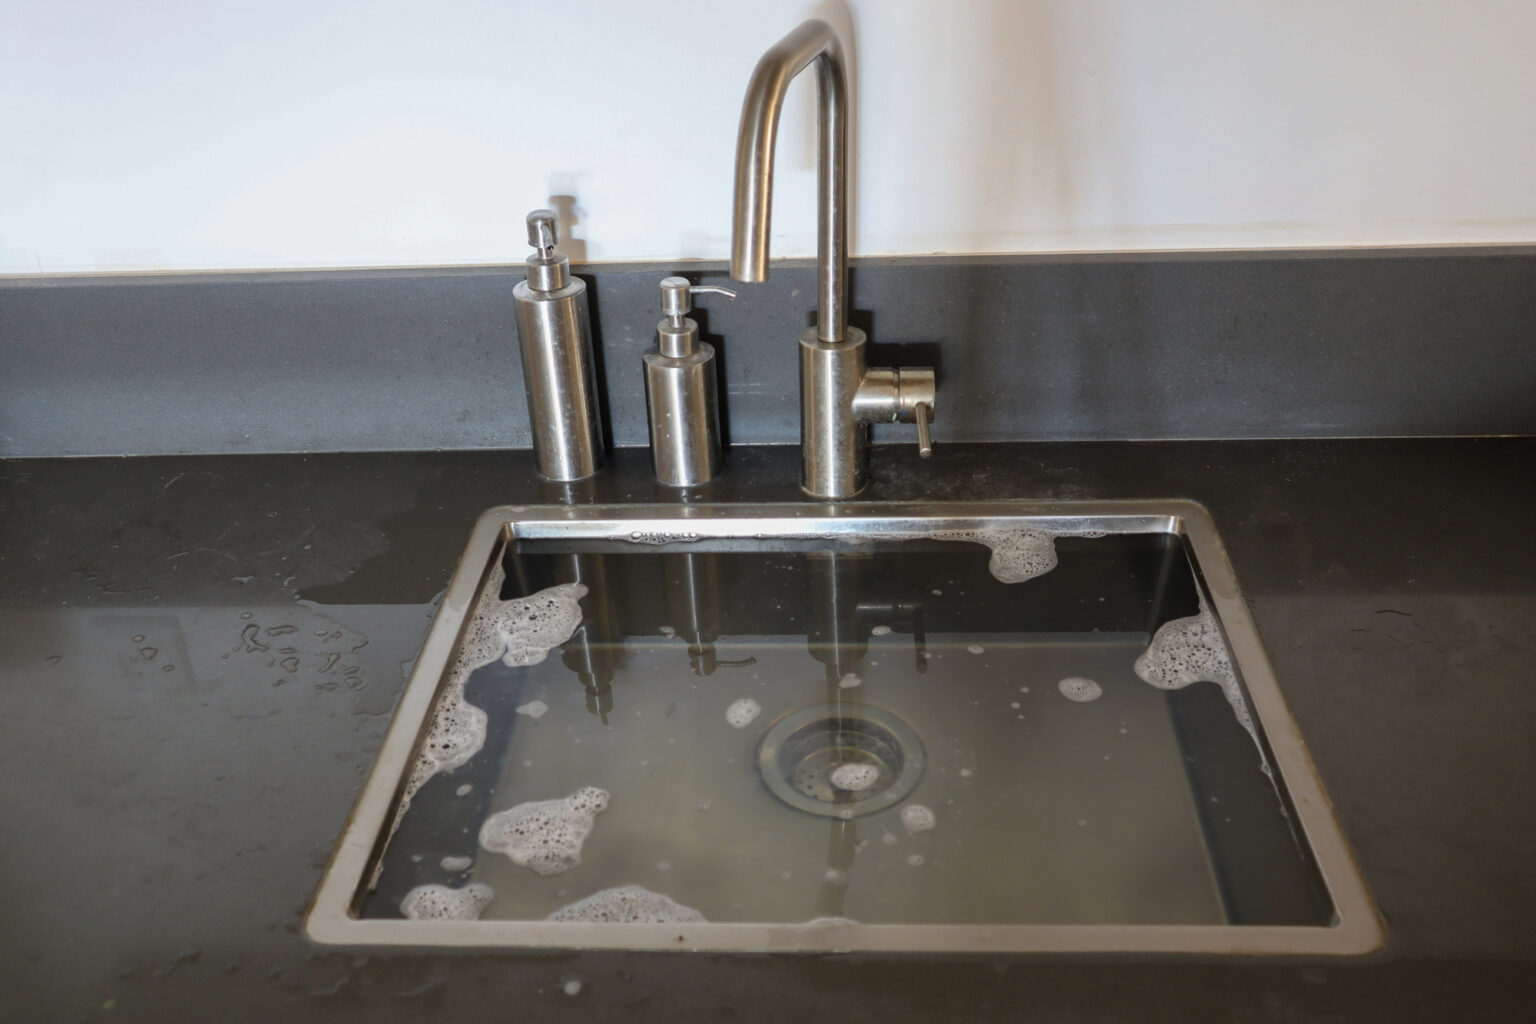 could kitchen sink be blocked due to air vent